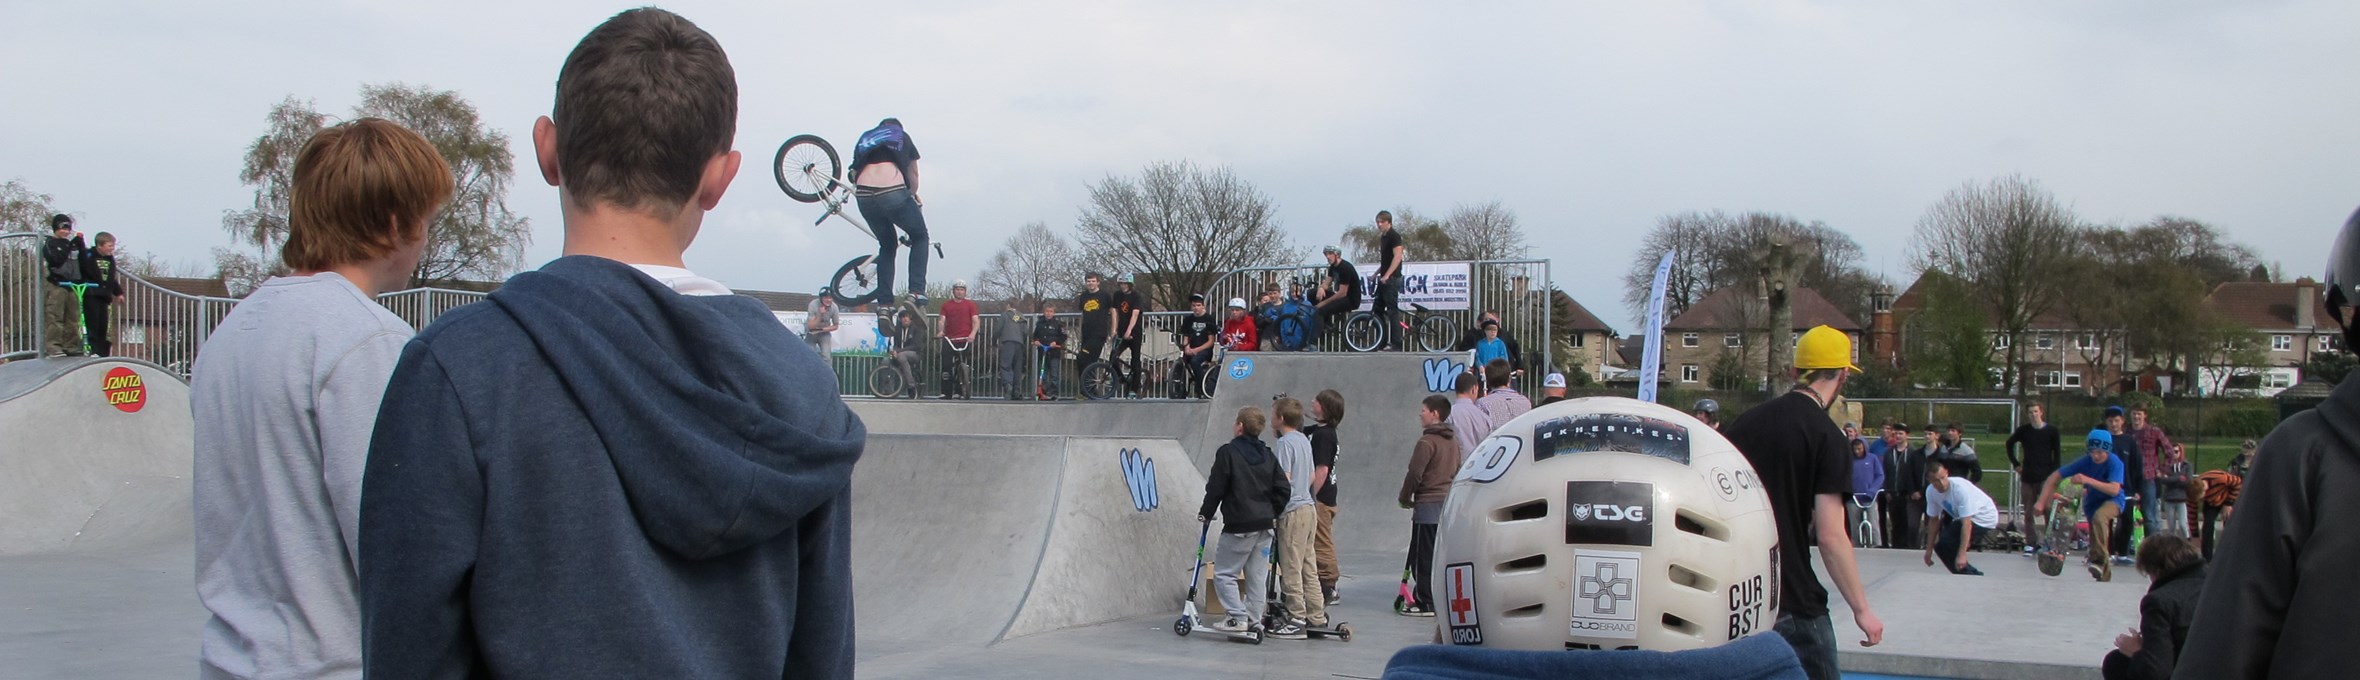 Young people with backs to camera watching others do bike and skate tricks on ramps